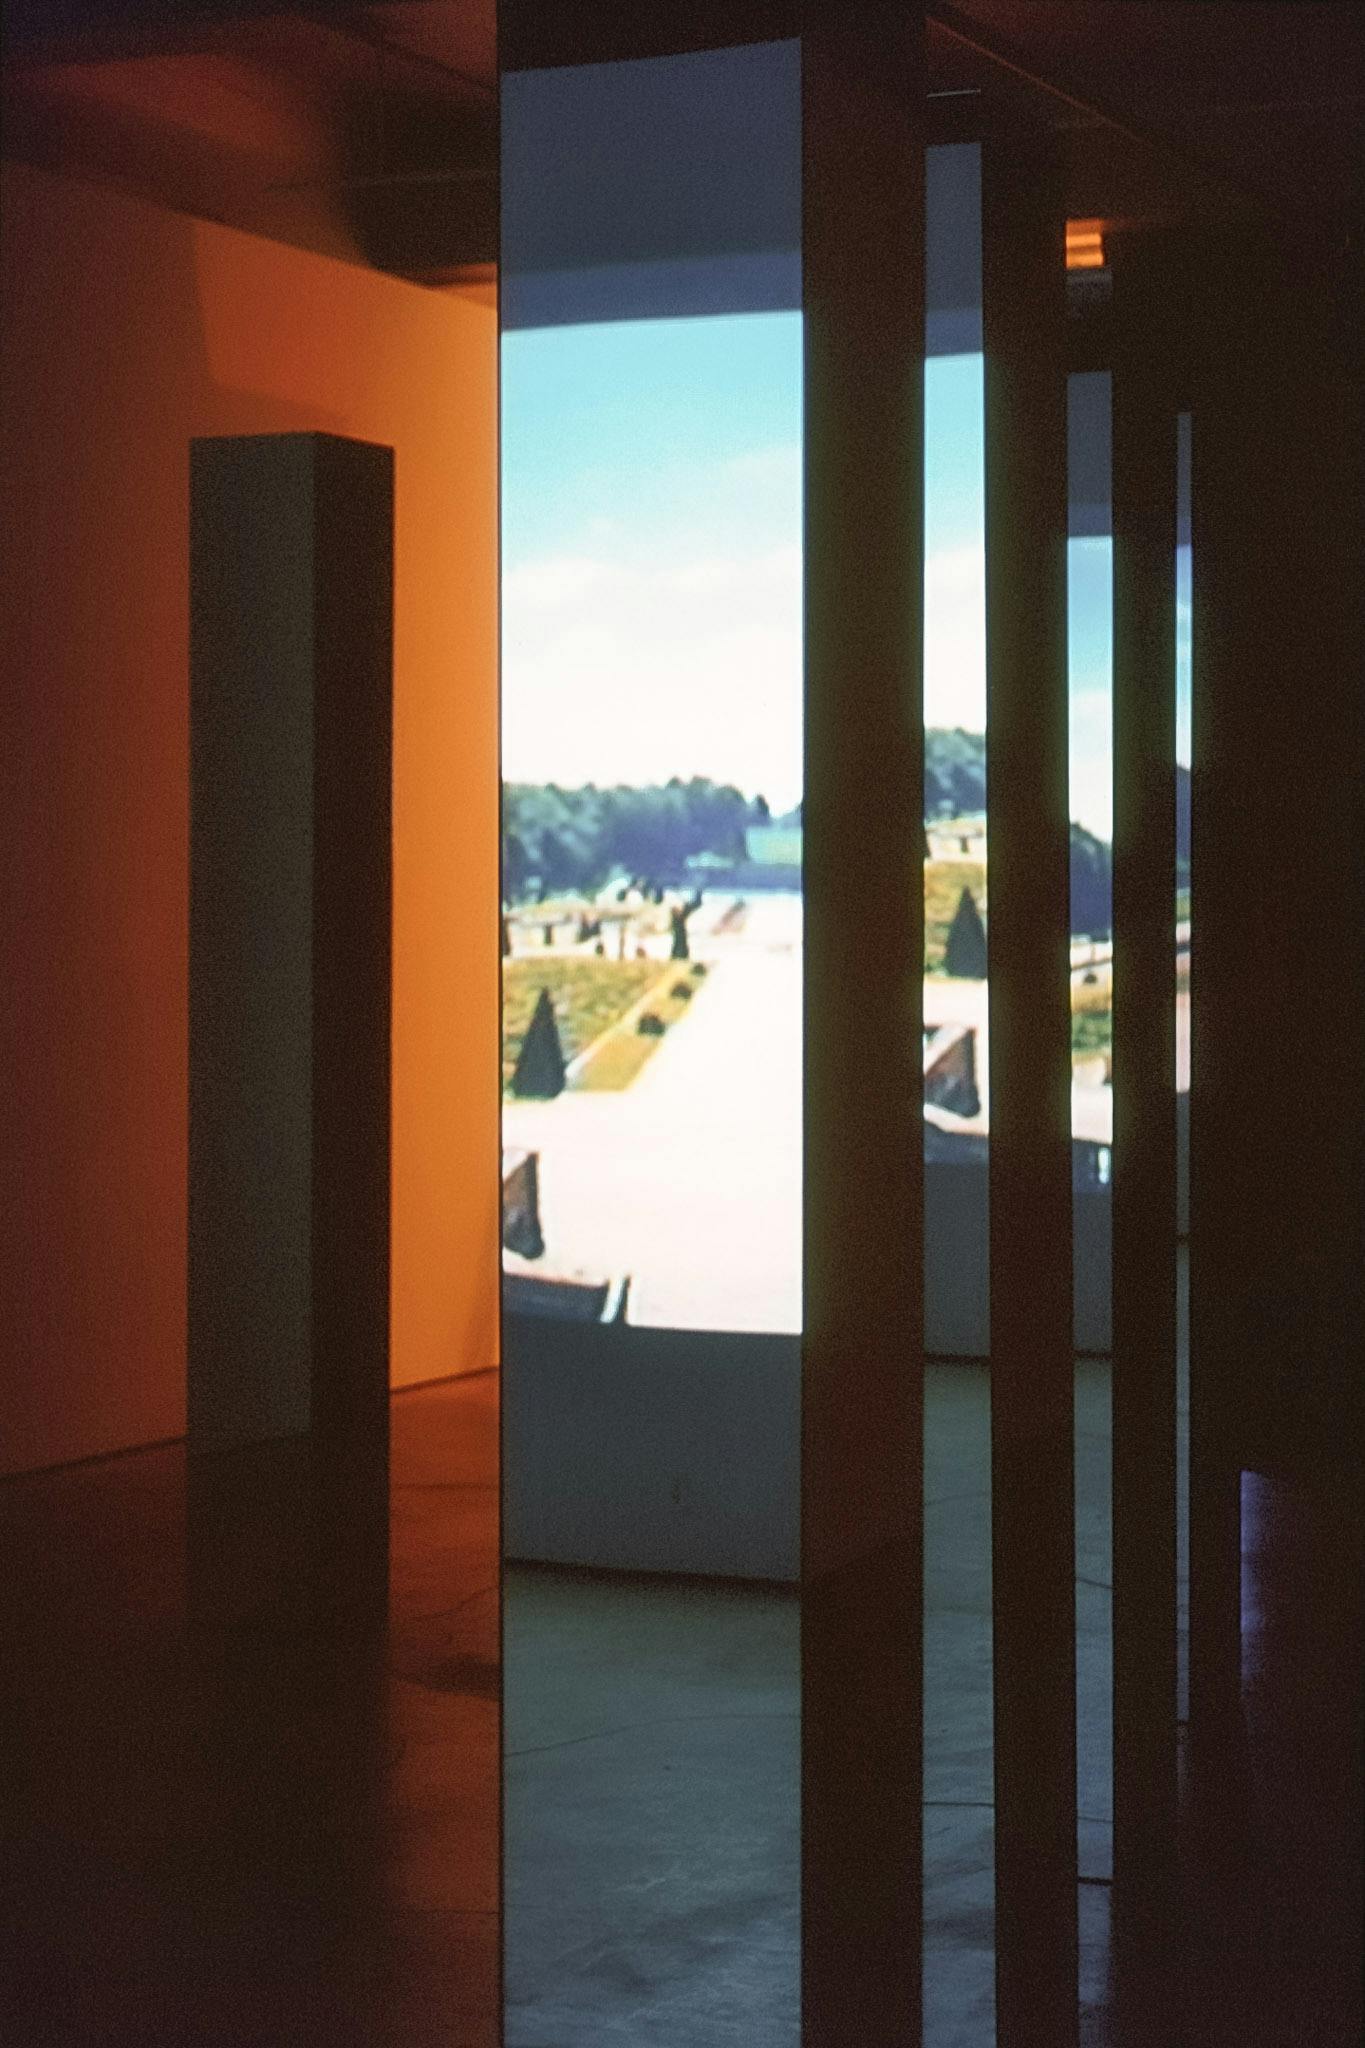 A close-up view of the mirrored columns installed in the gallery. They stand on the floor and reflect a photographed image of a garden that is projected on the wall. 